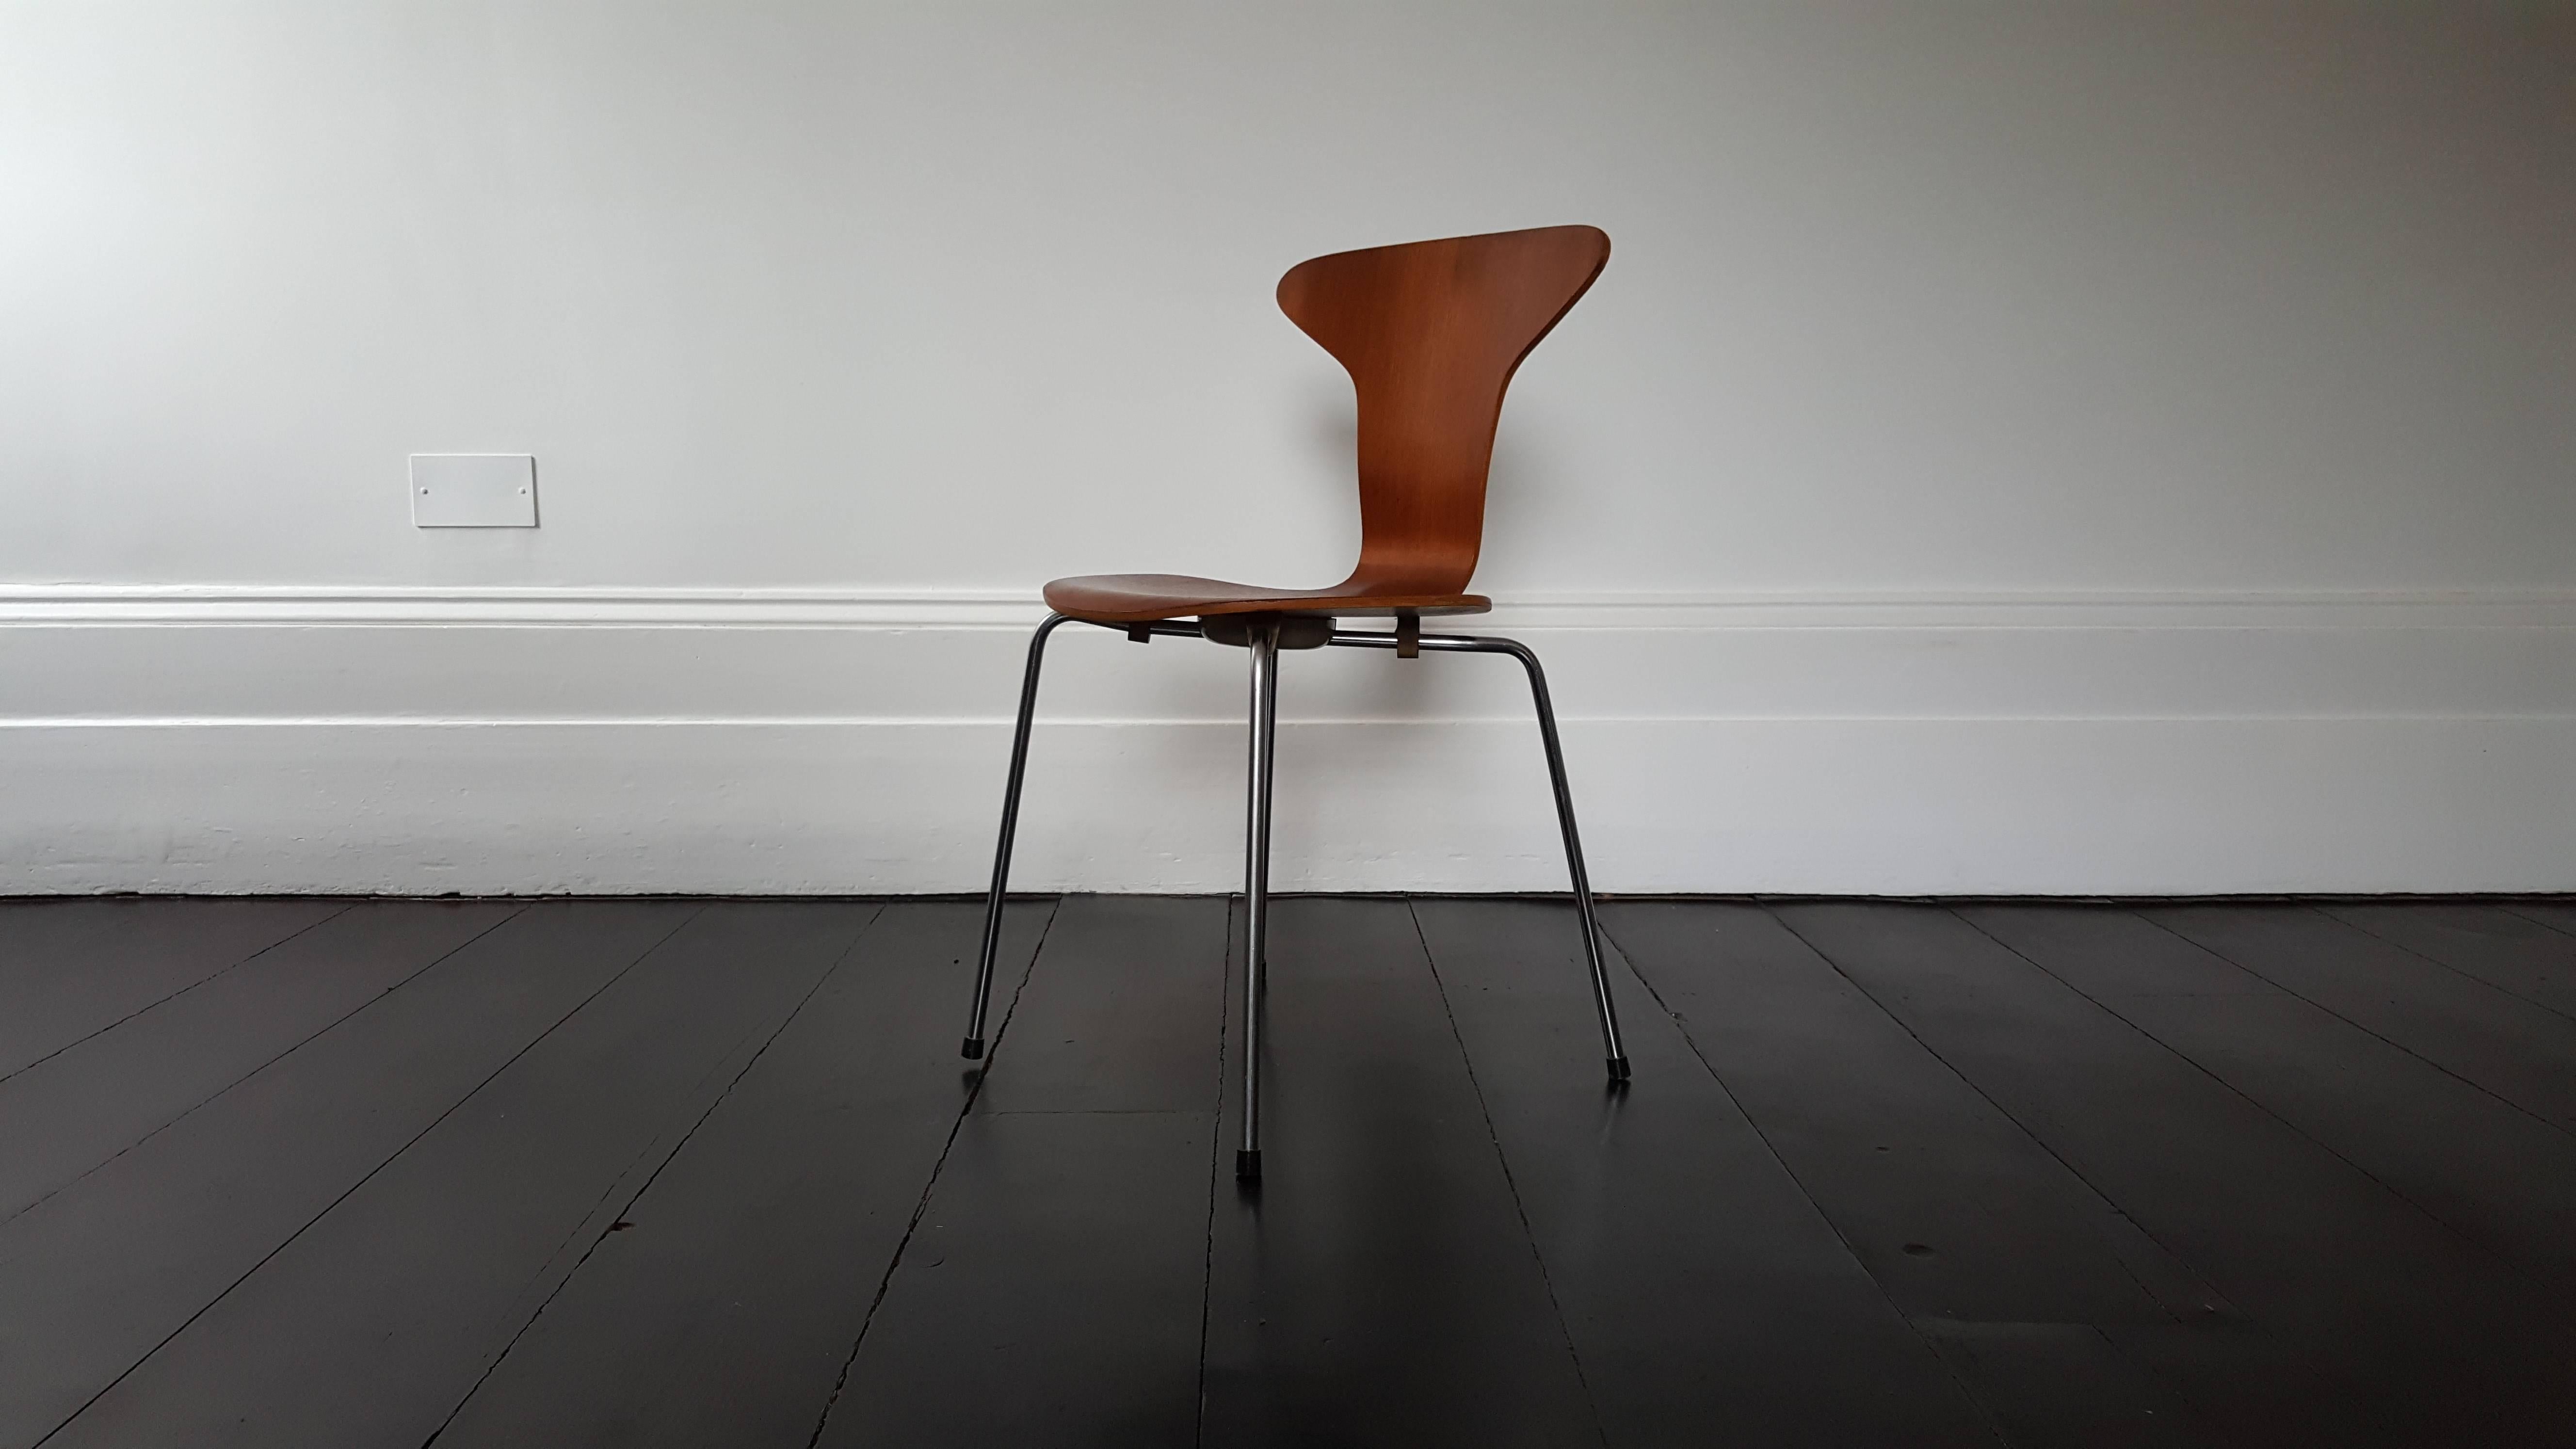 The 'Mosquito' chair by Arne Jacobsen for Fritz Hansen, 1955.

This chair is known as the Mosquito chair and designed by Arne Jacobsen for Fritz Hansen. It's Danish name it the 'Munkegaard' chair and was created in 1955.

We ship globally,